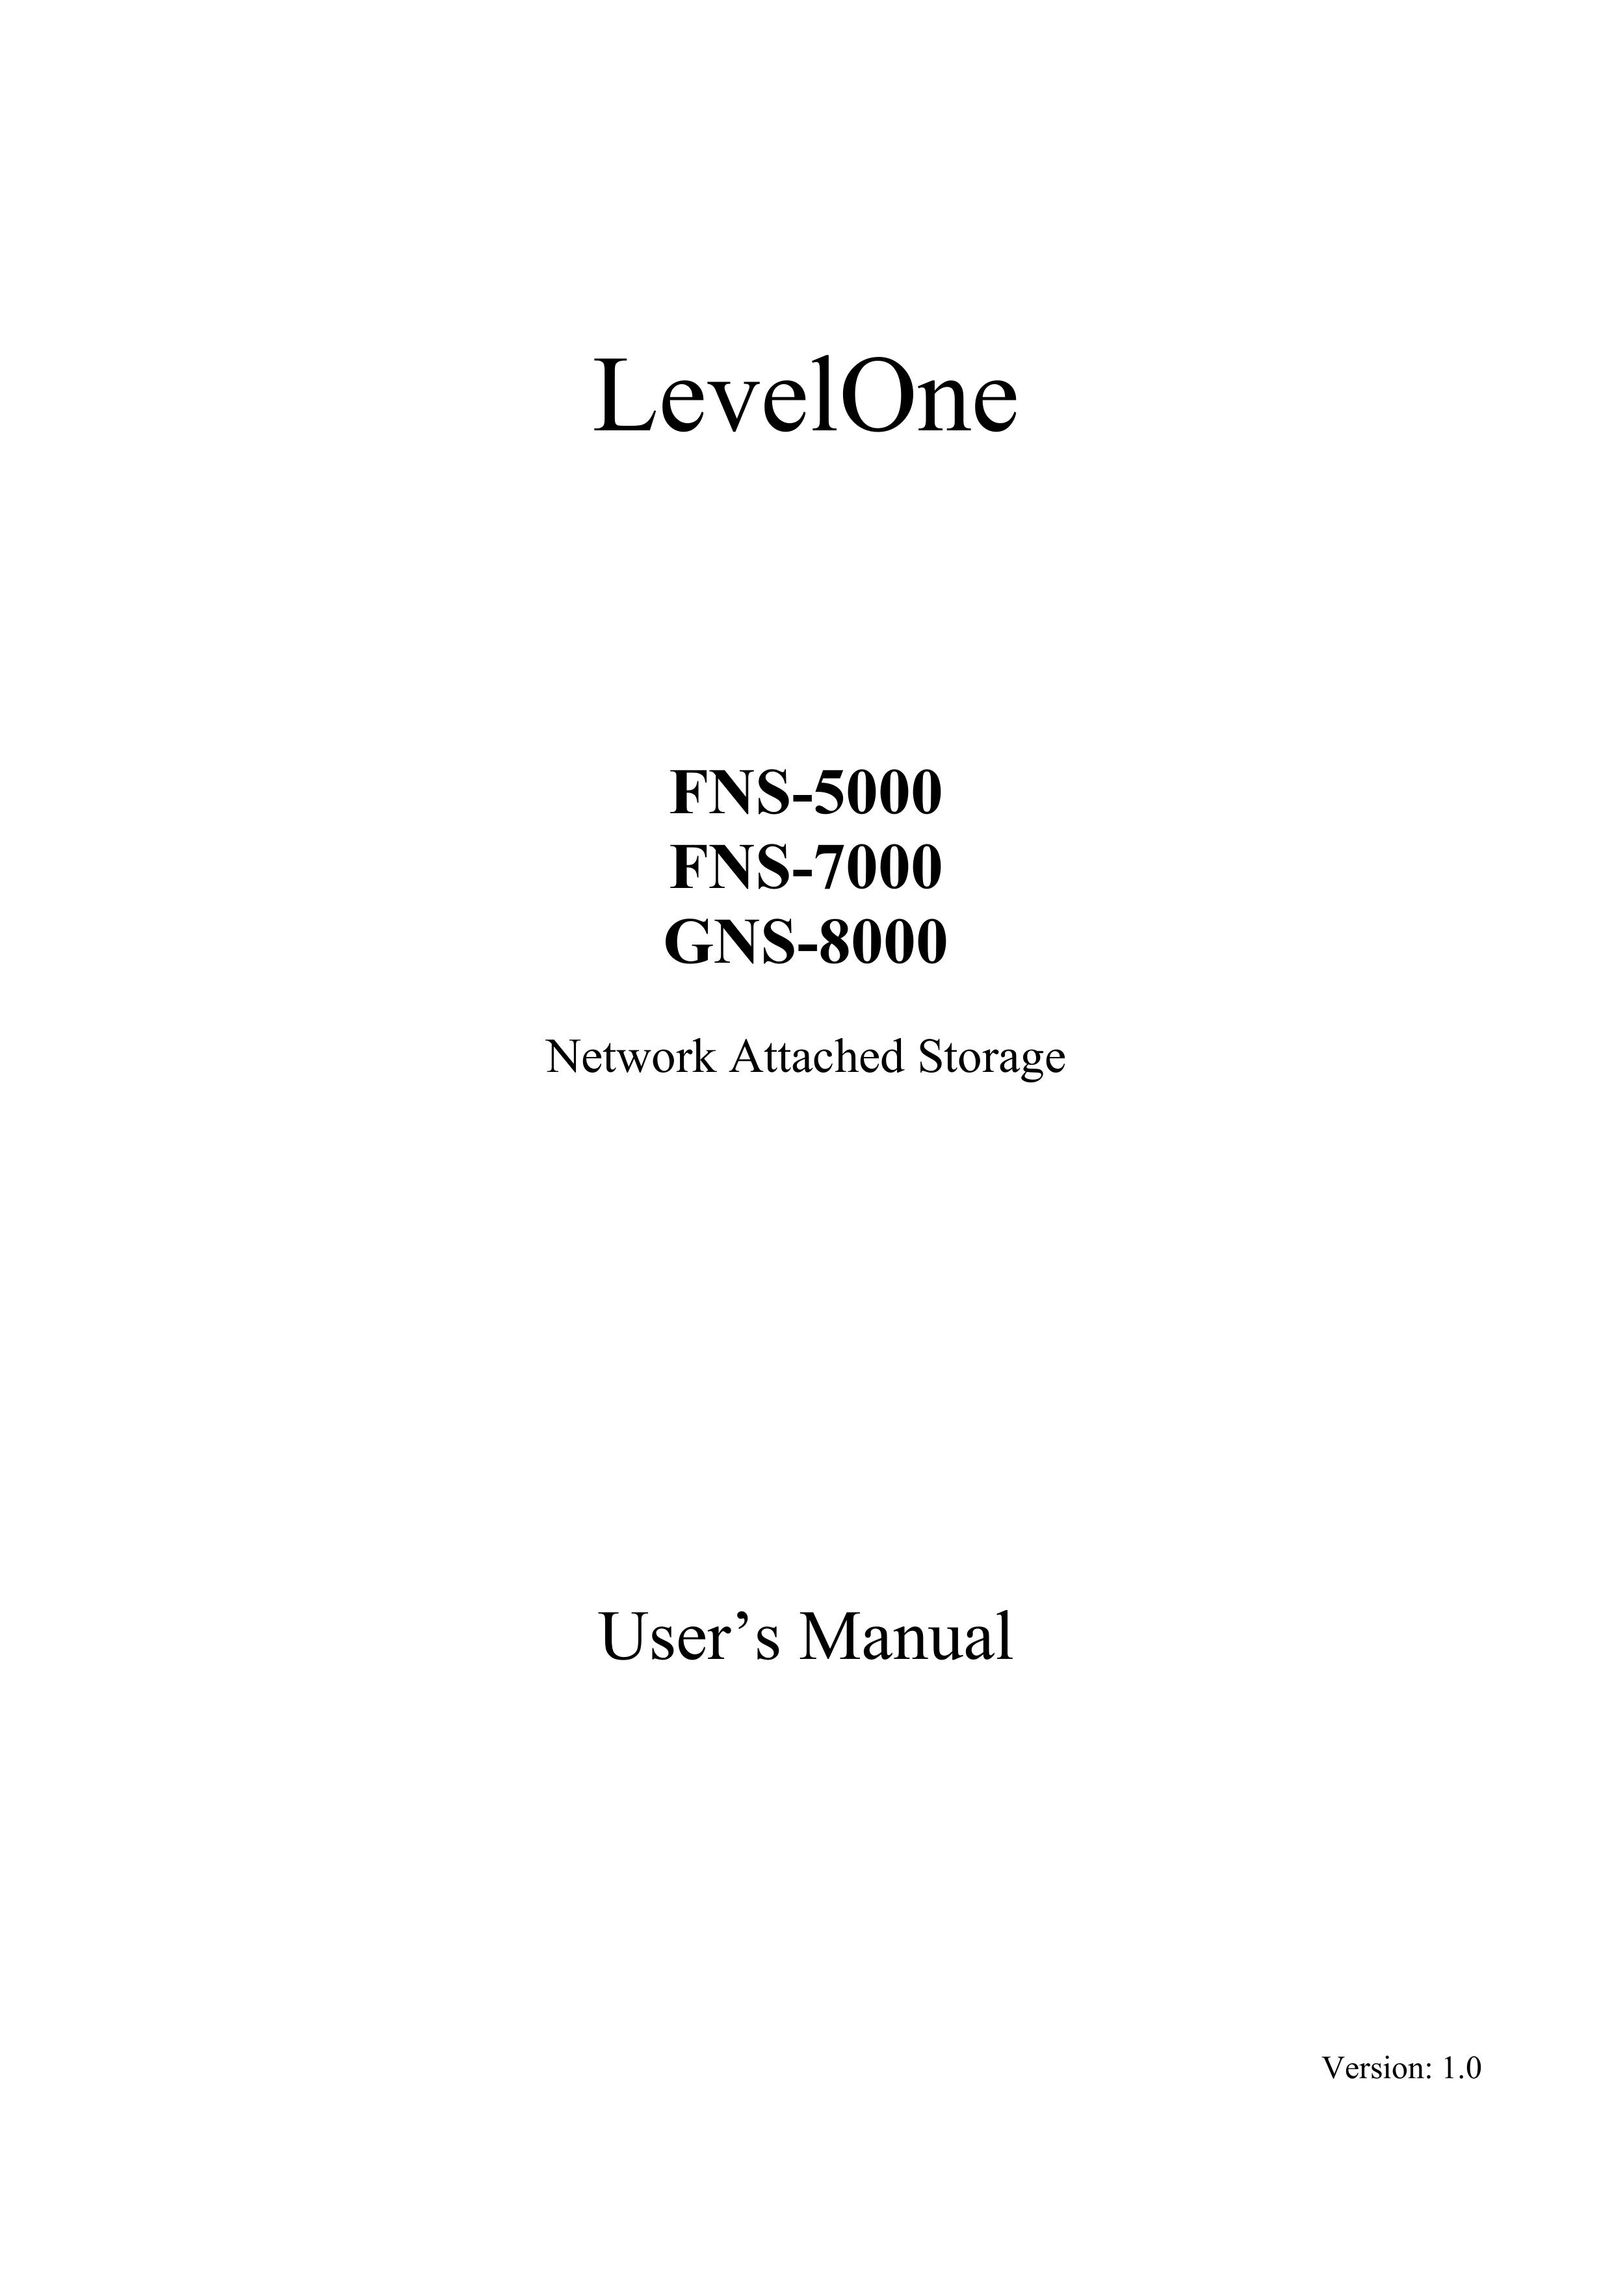 LevelOne GNS-8000 Network Card User Manual